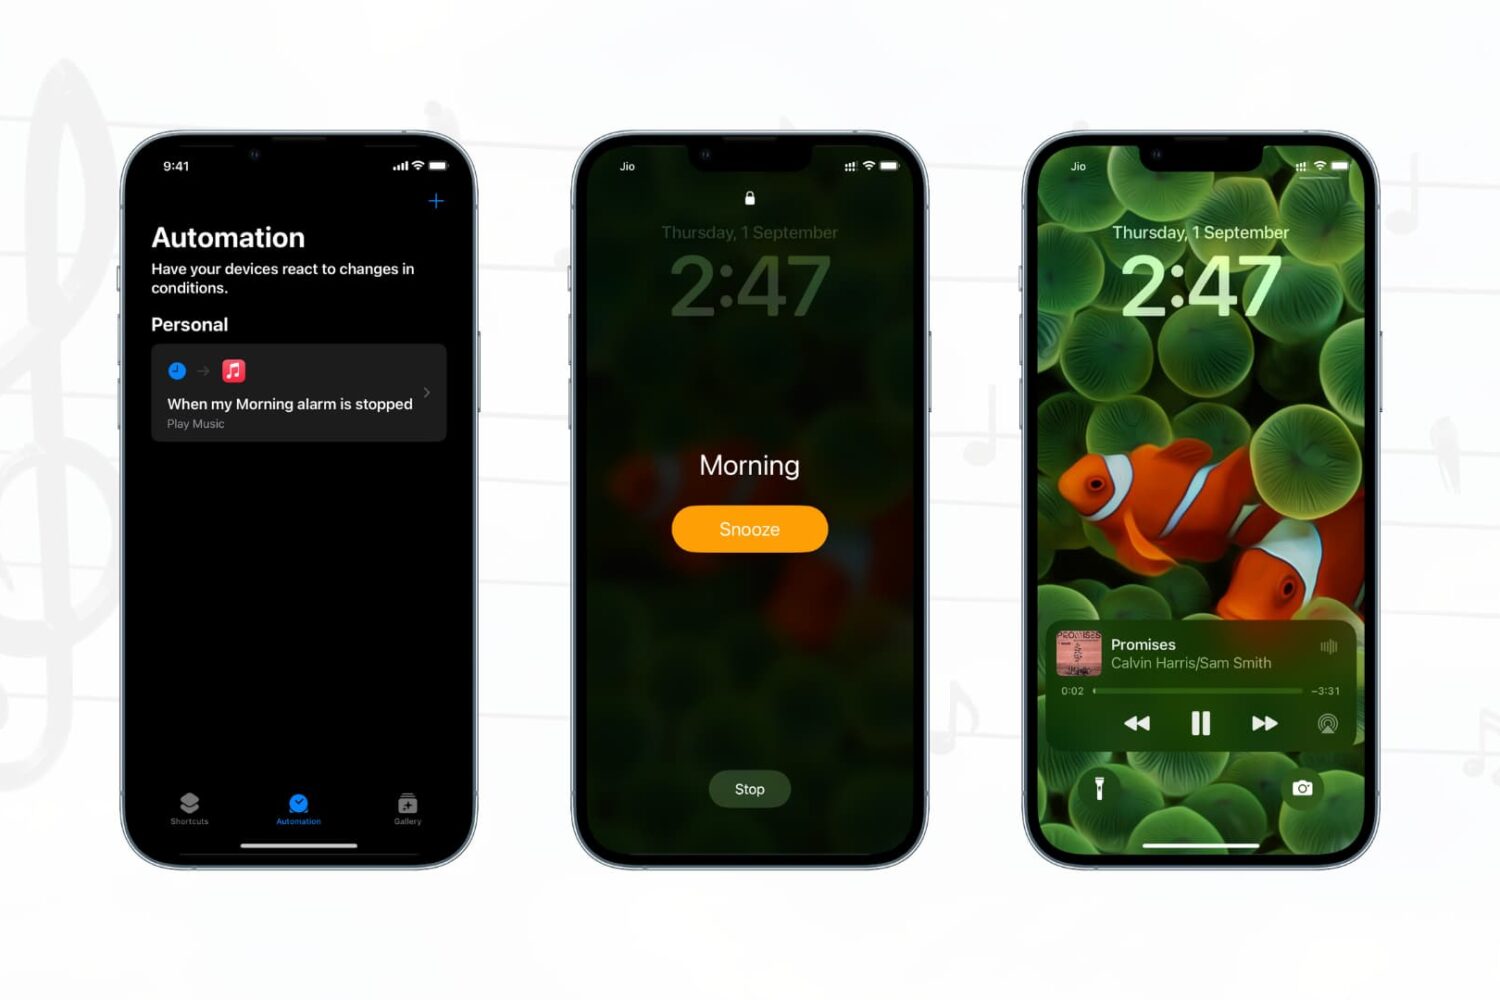 Automatically play music when alarm stops on iPhone